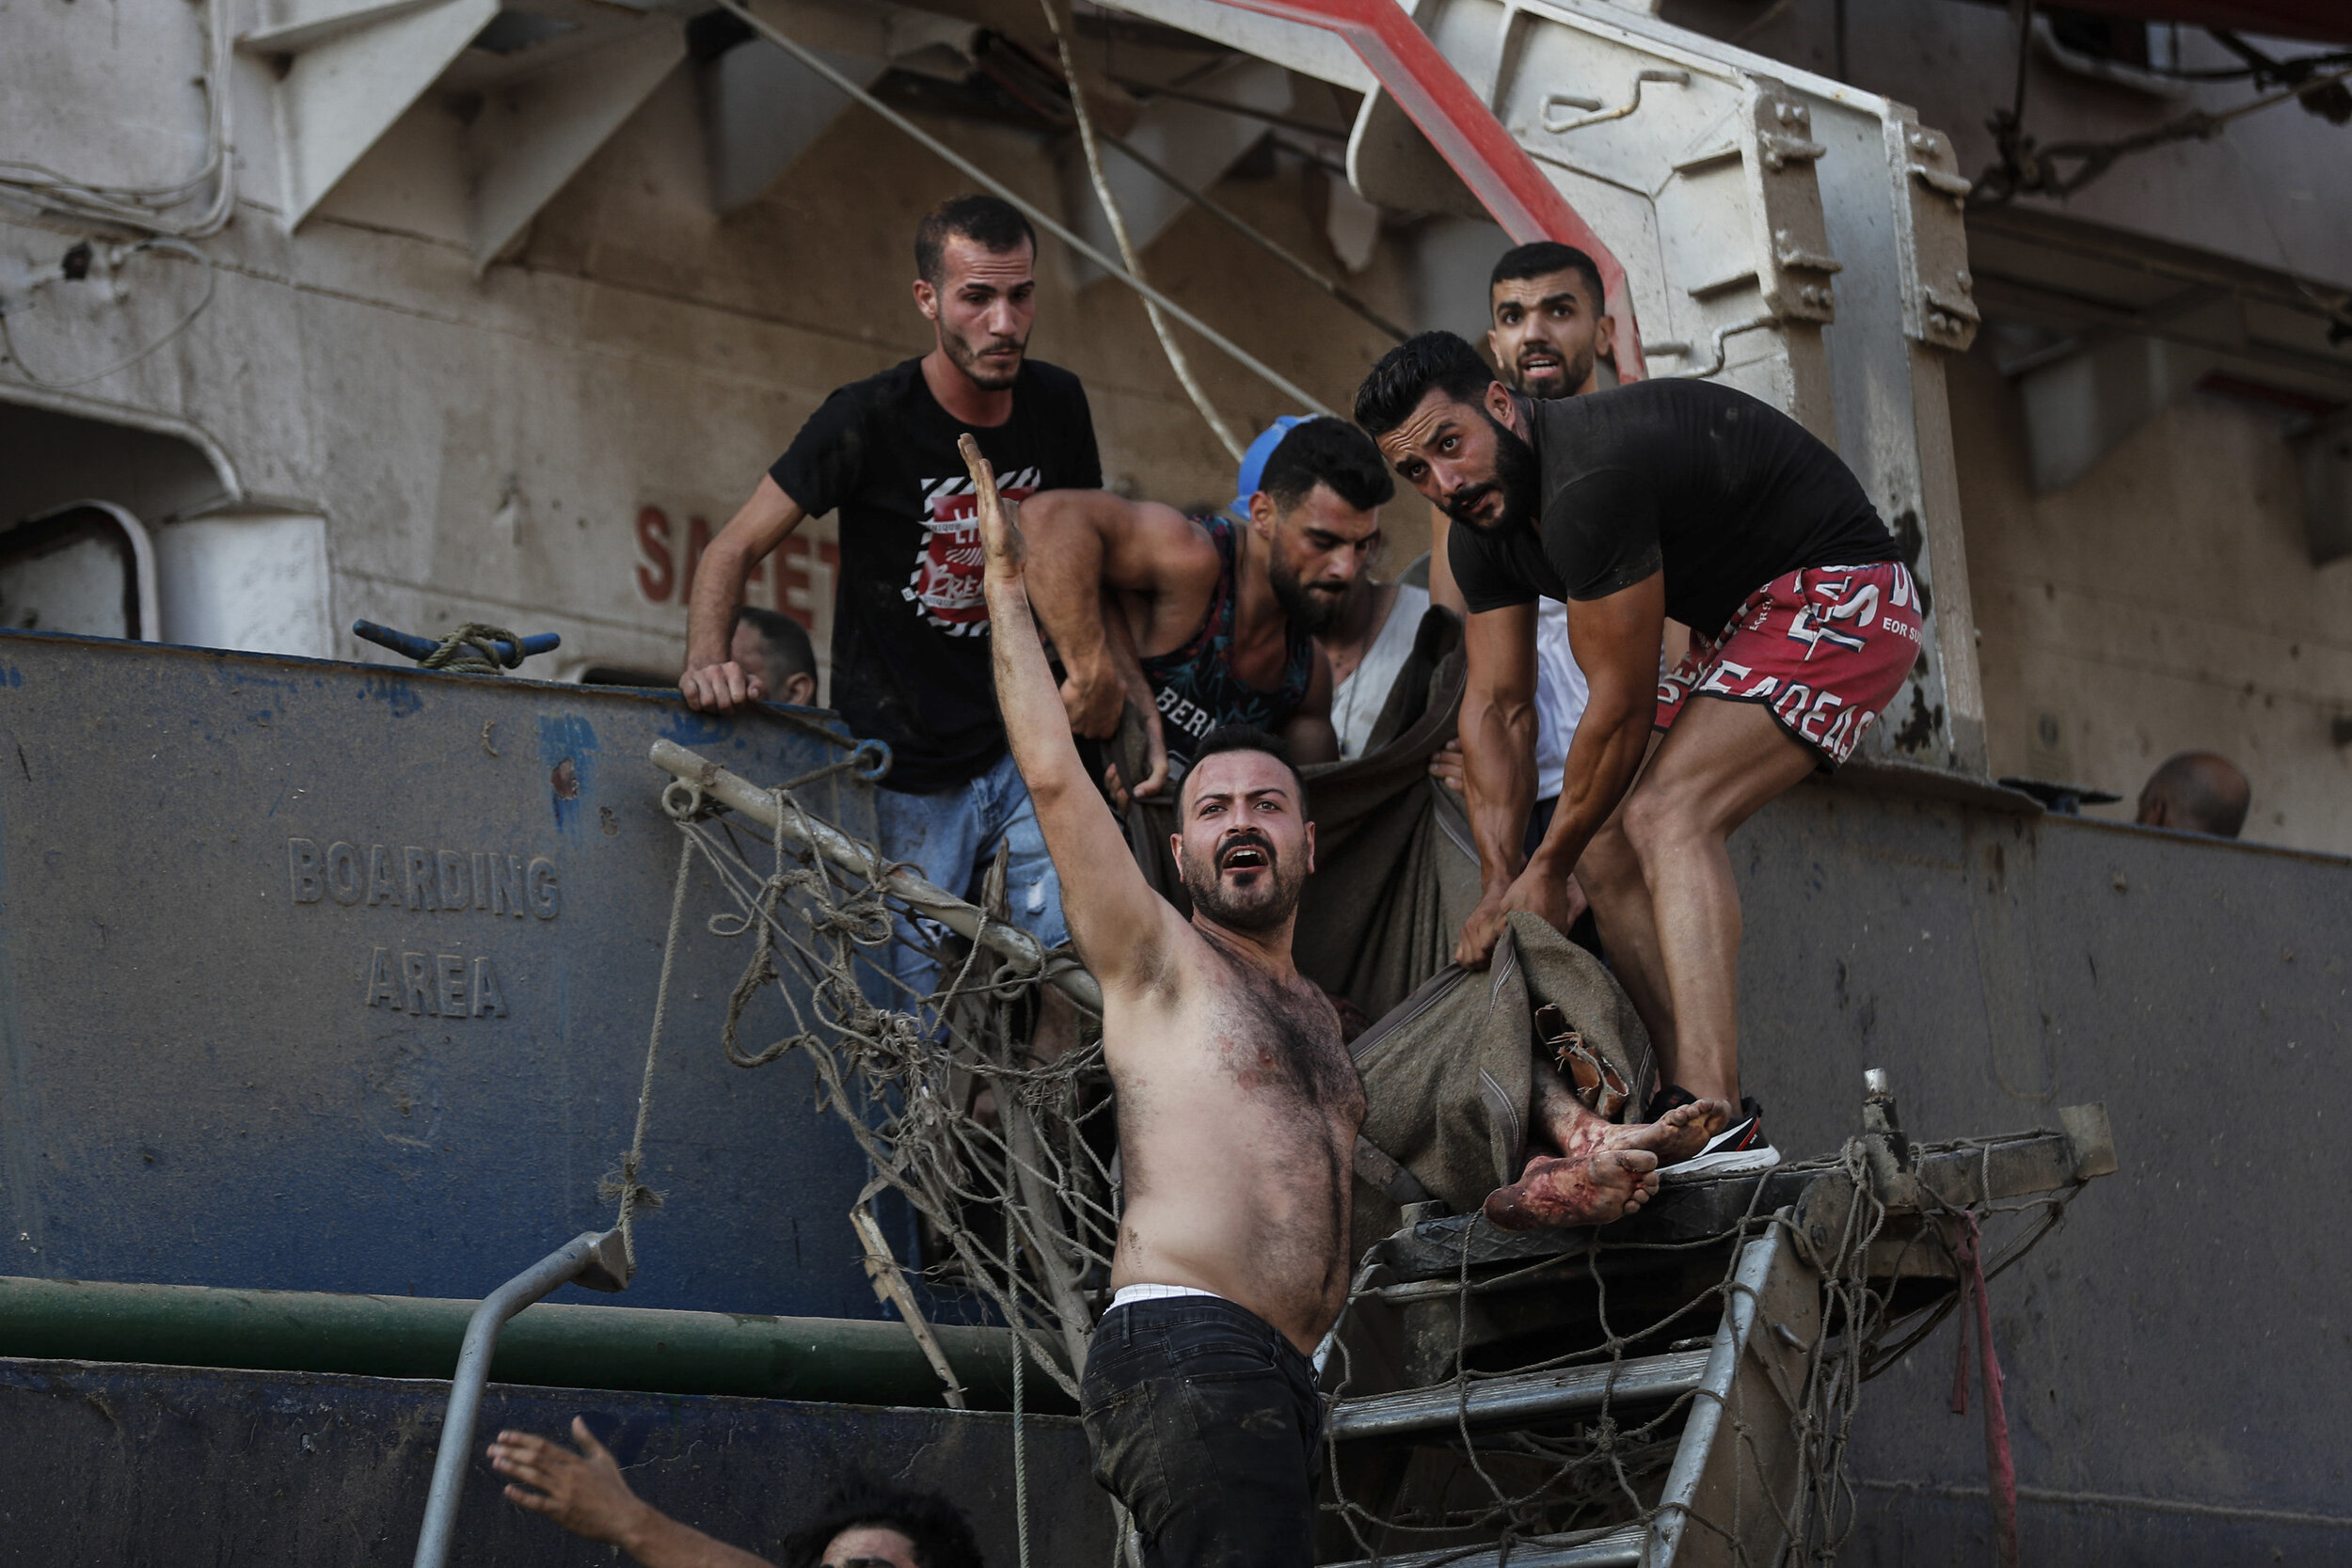  Civilians help to evacuate an injured sailor from a ship which was docked near the explosion scene that hit the seaport of Beirut, Lebanon, Tuesday, Aug. 4, 2020. (AP Photo/Hussein Malla) 